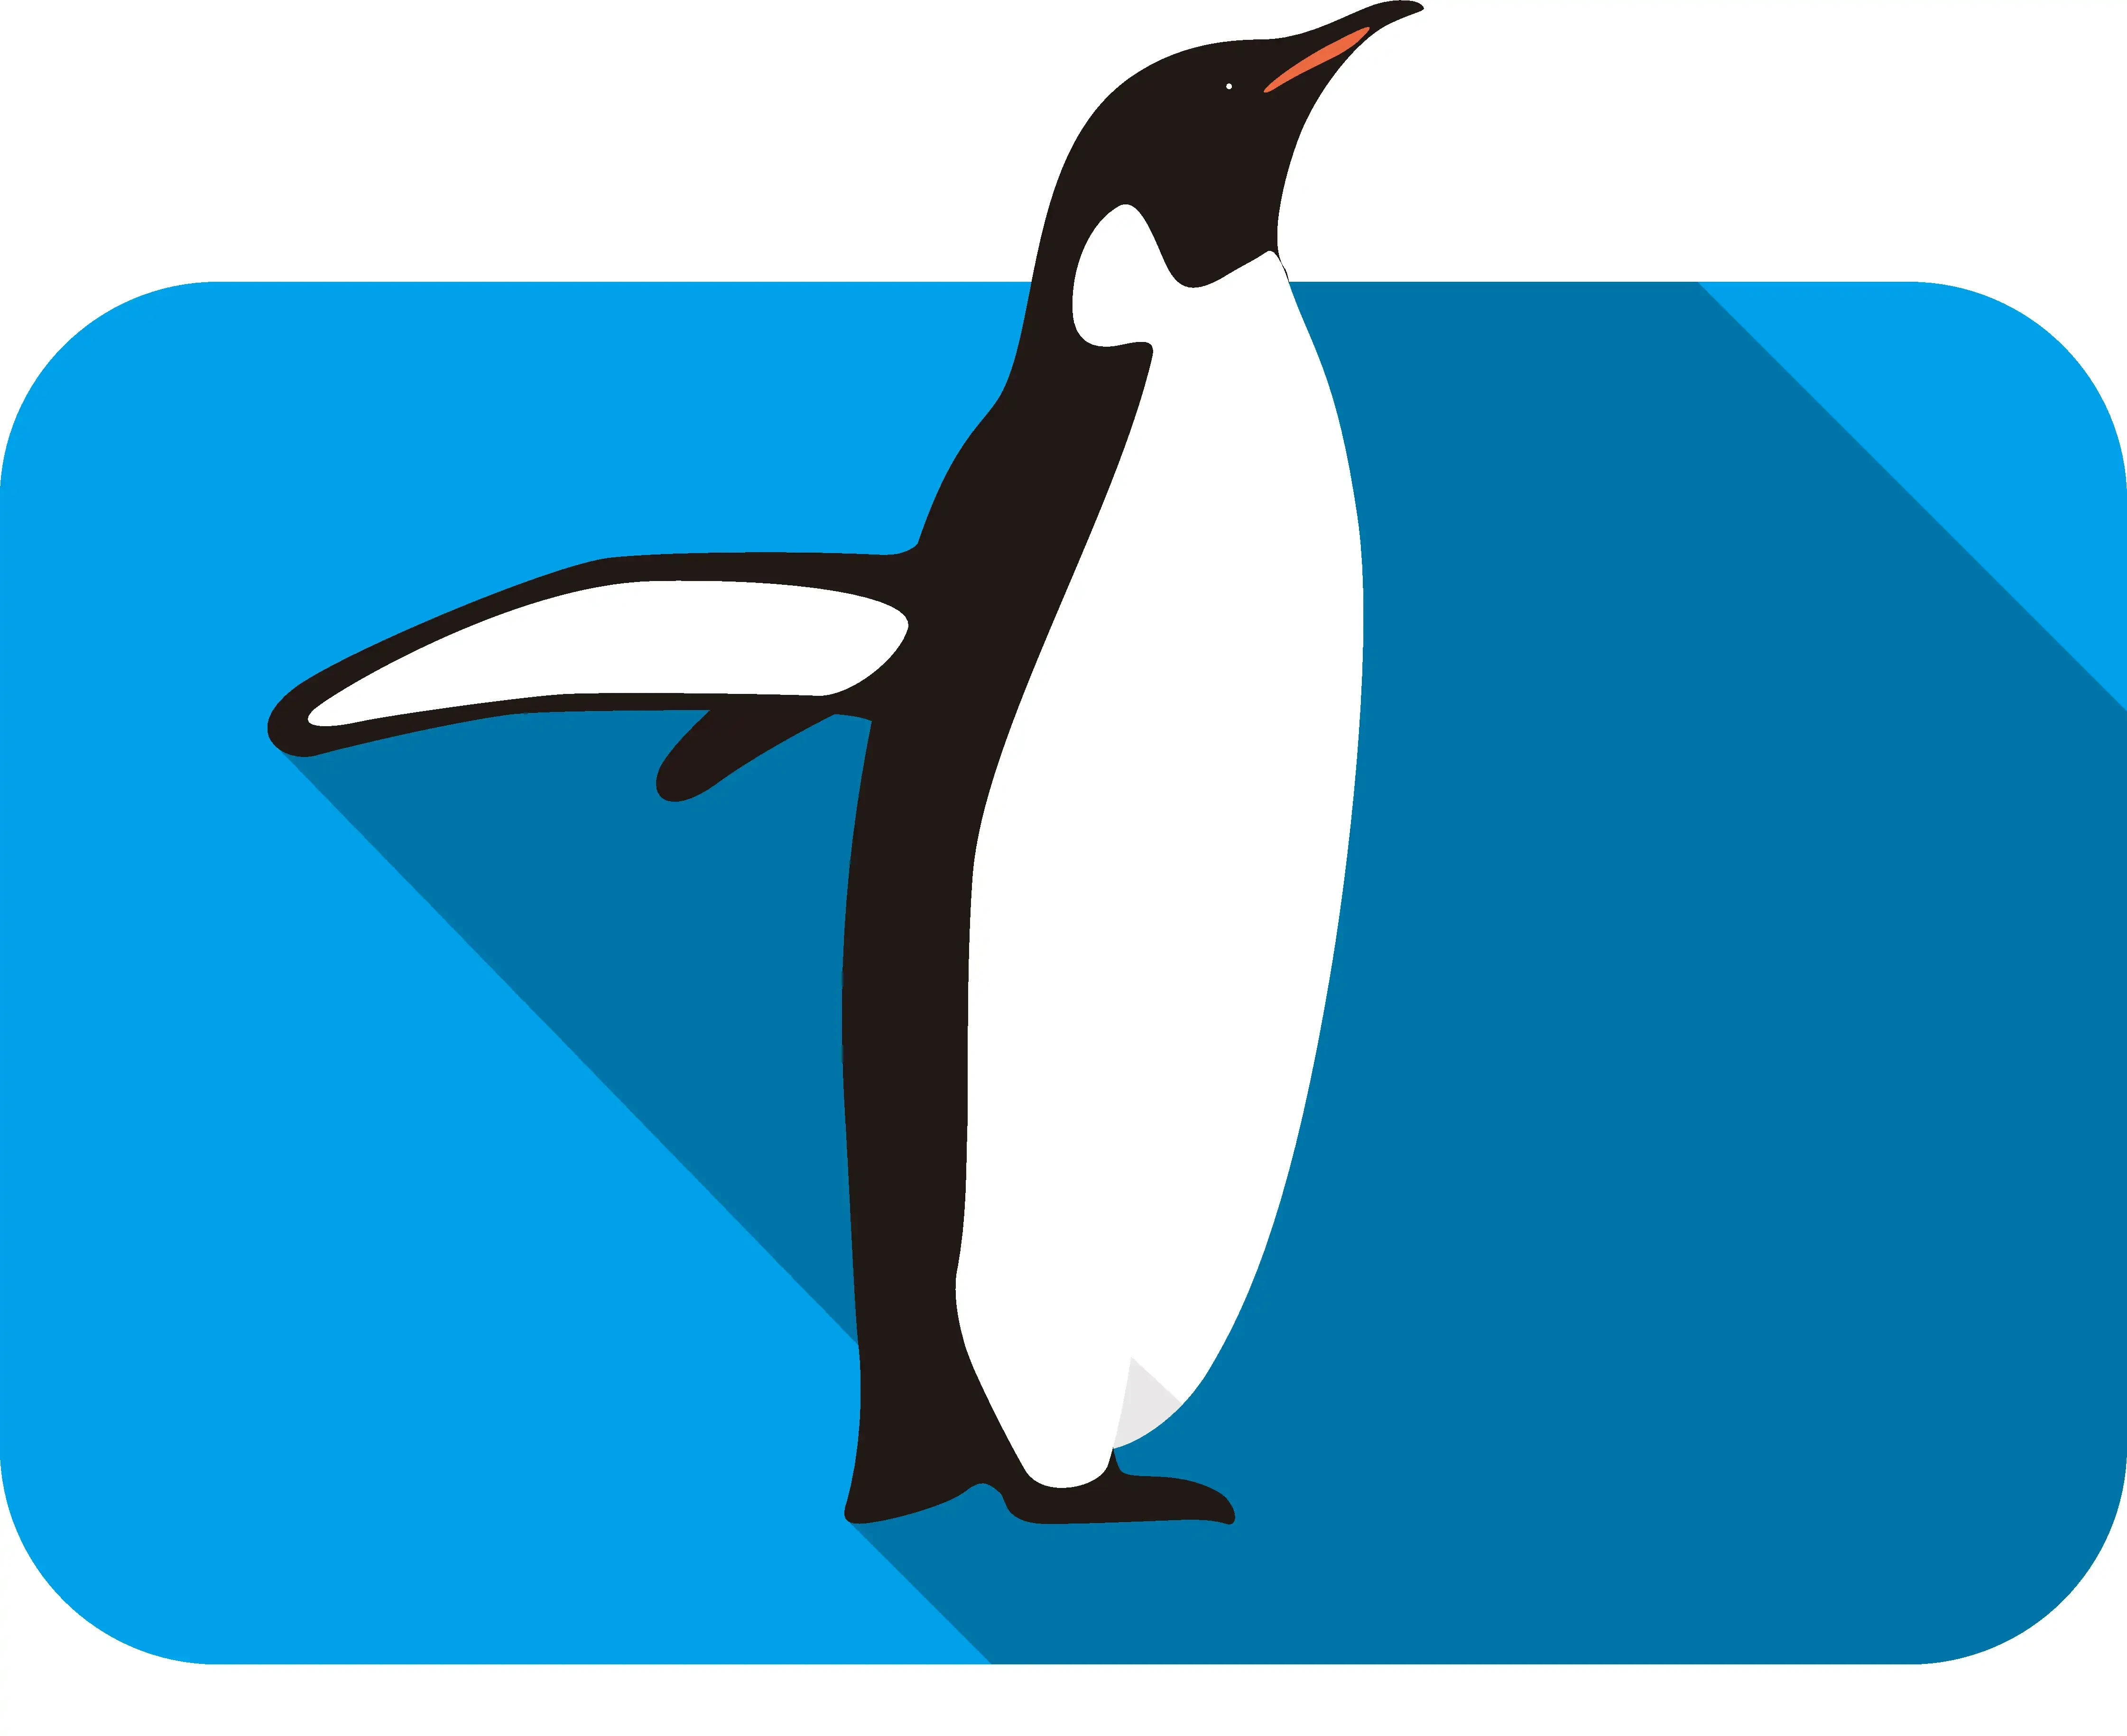 Linux & Open Source Solutions